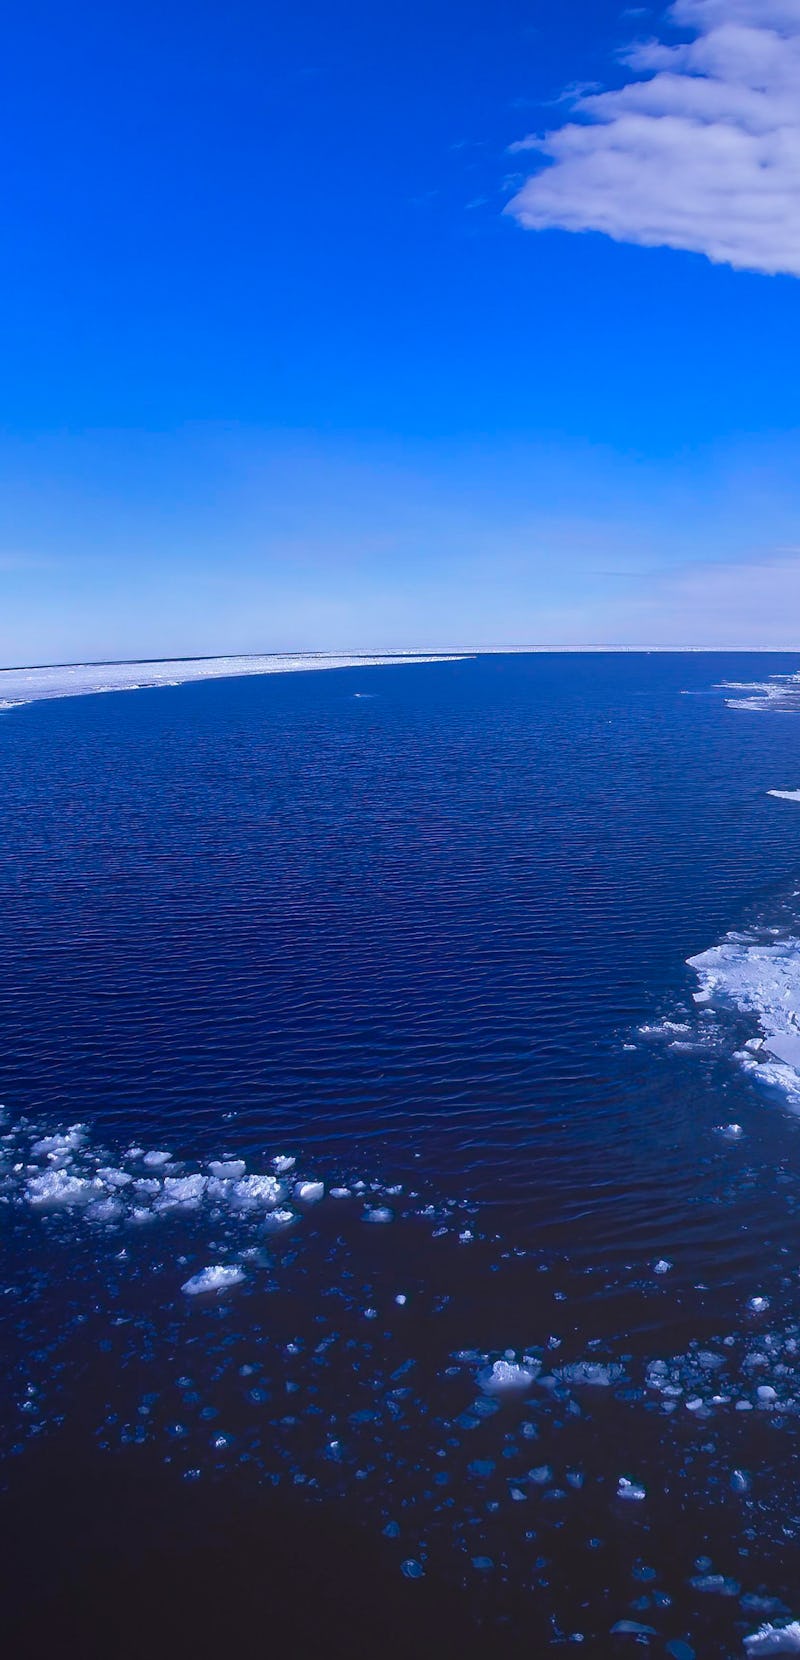 An aerial shot of the Weddell Sea off the coast of Antarctica